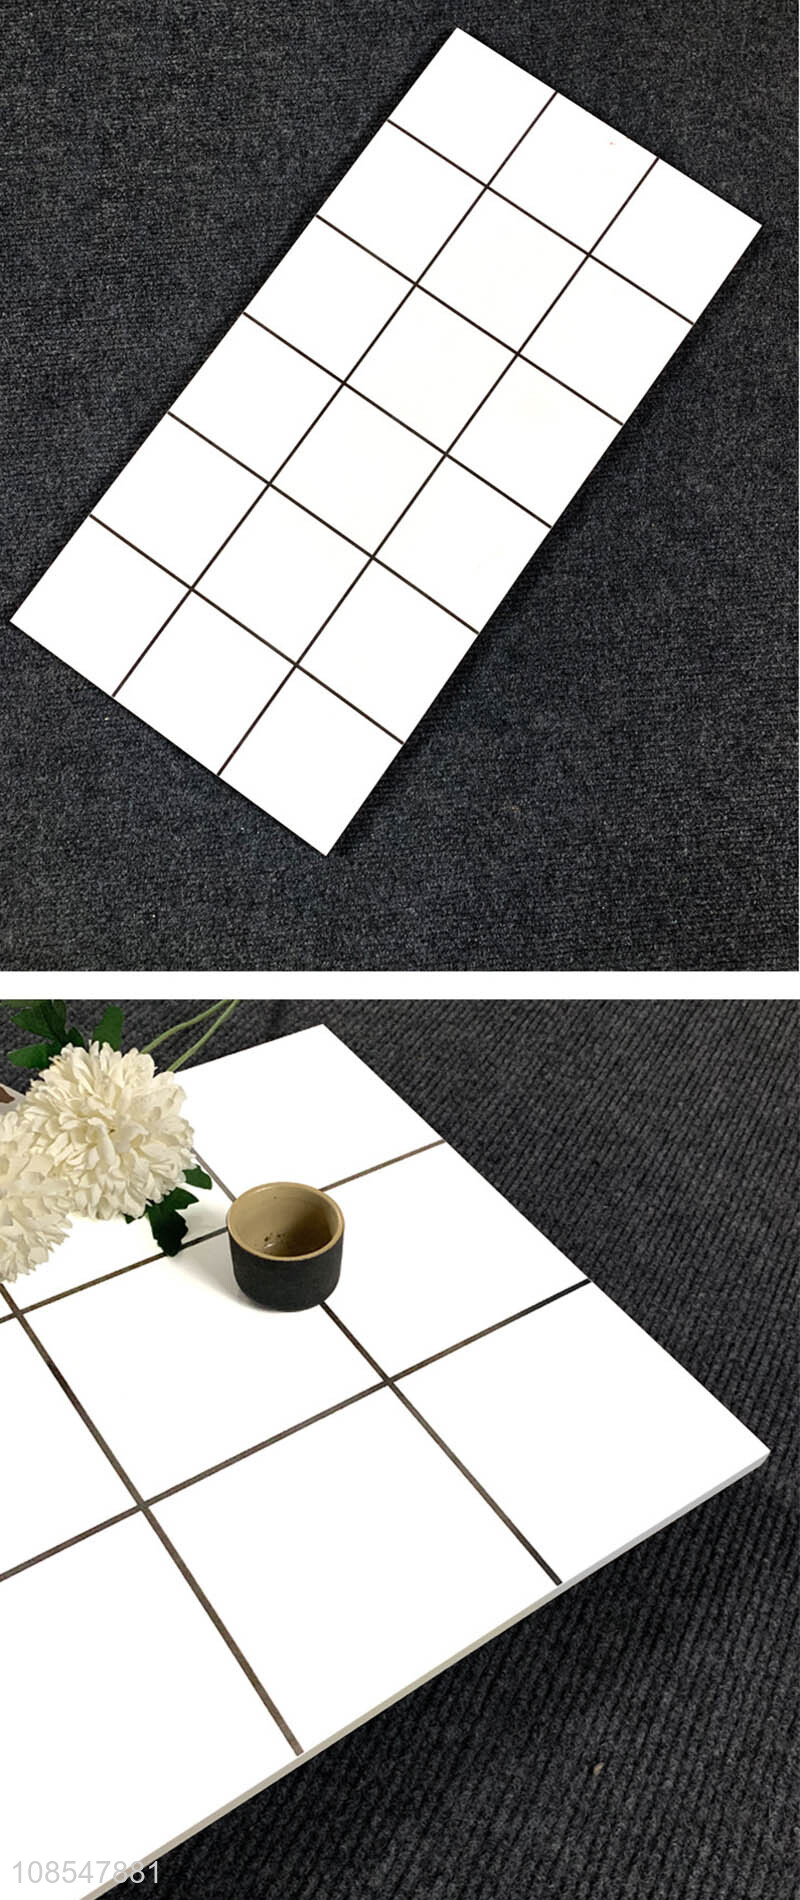 China factory black and white checkered bathroom tile floor tile